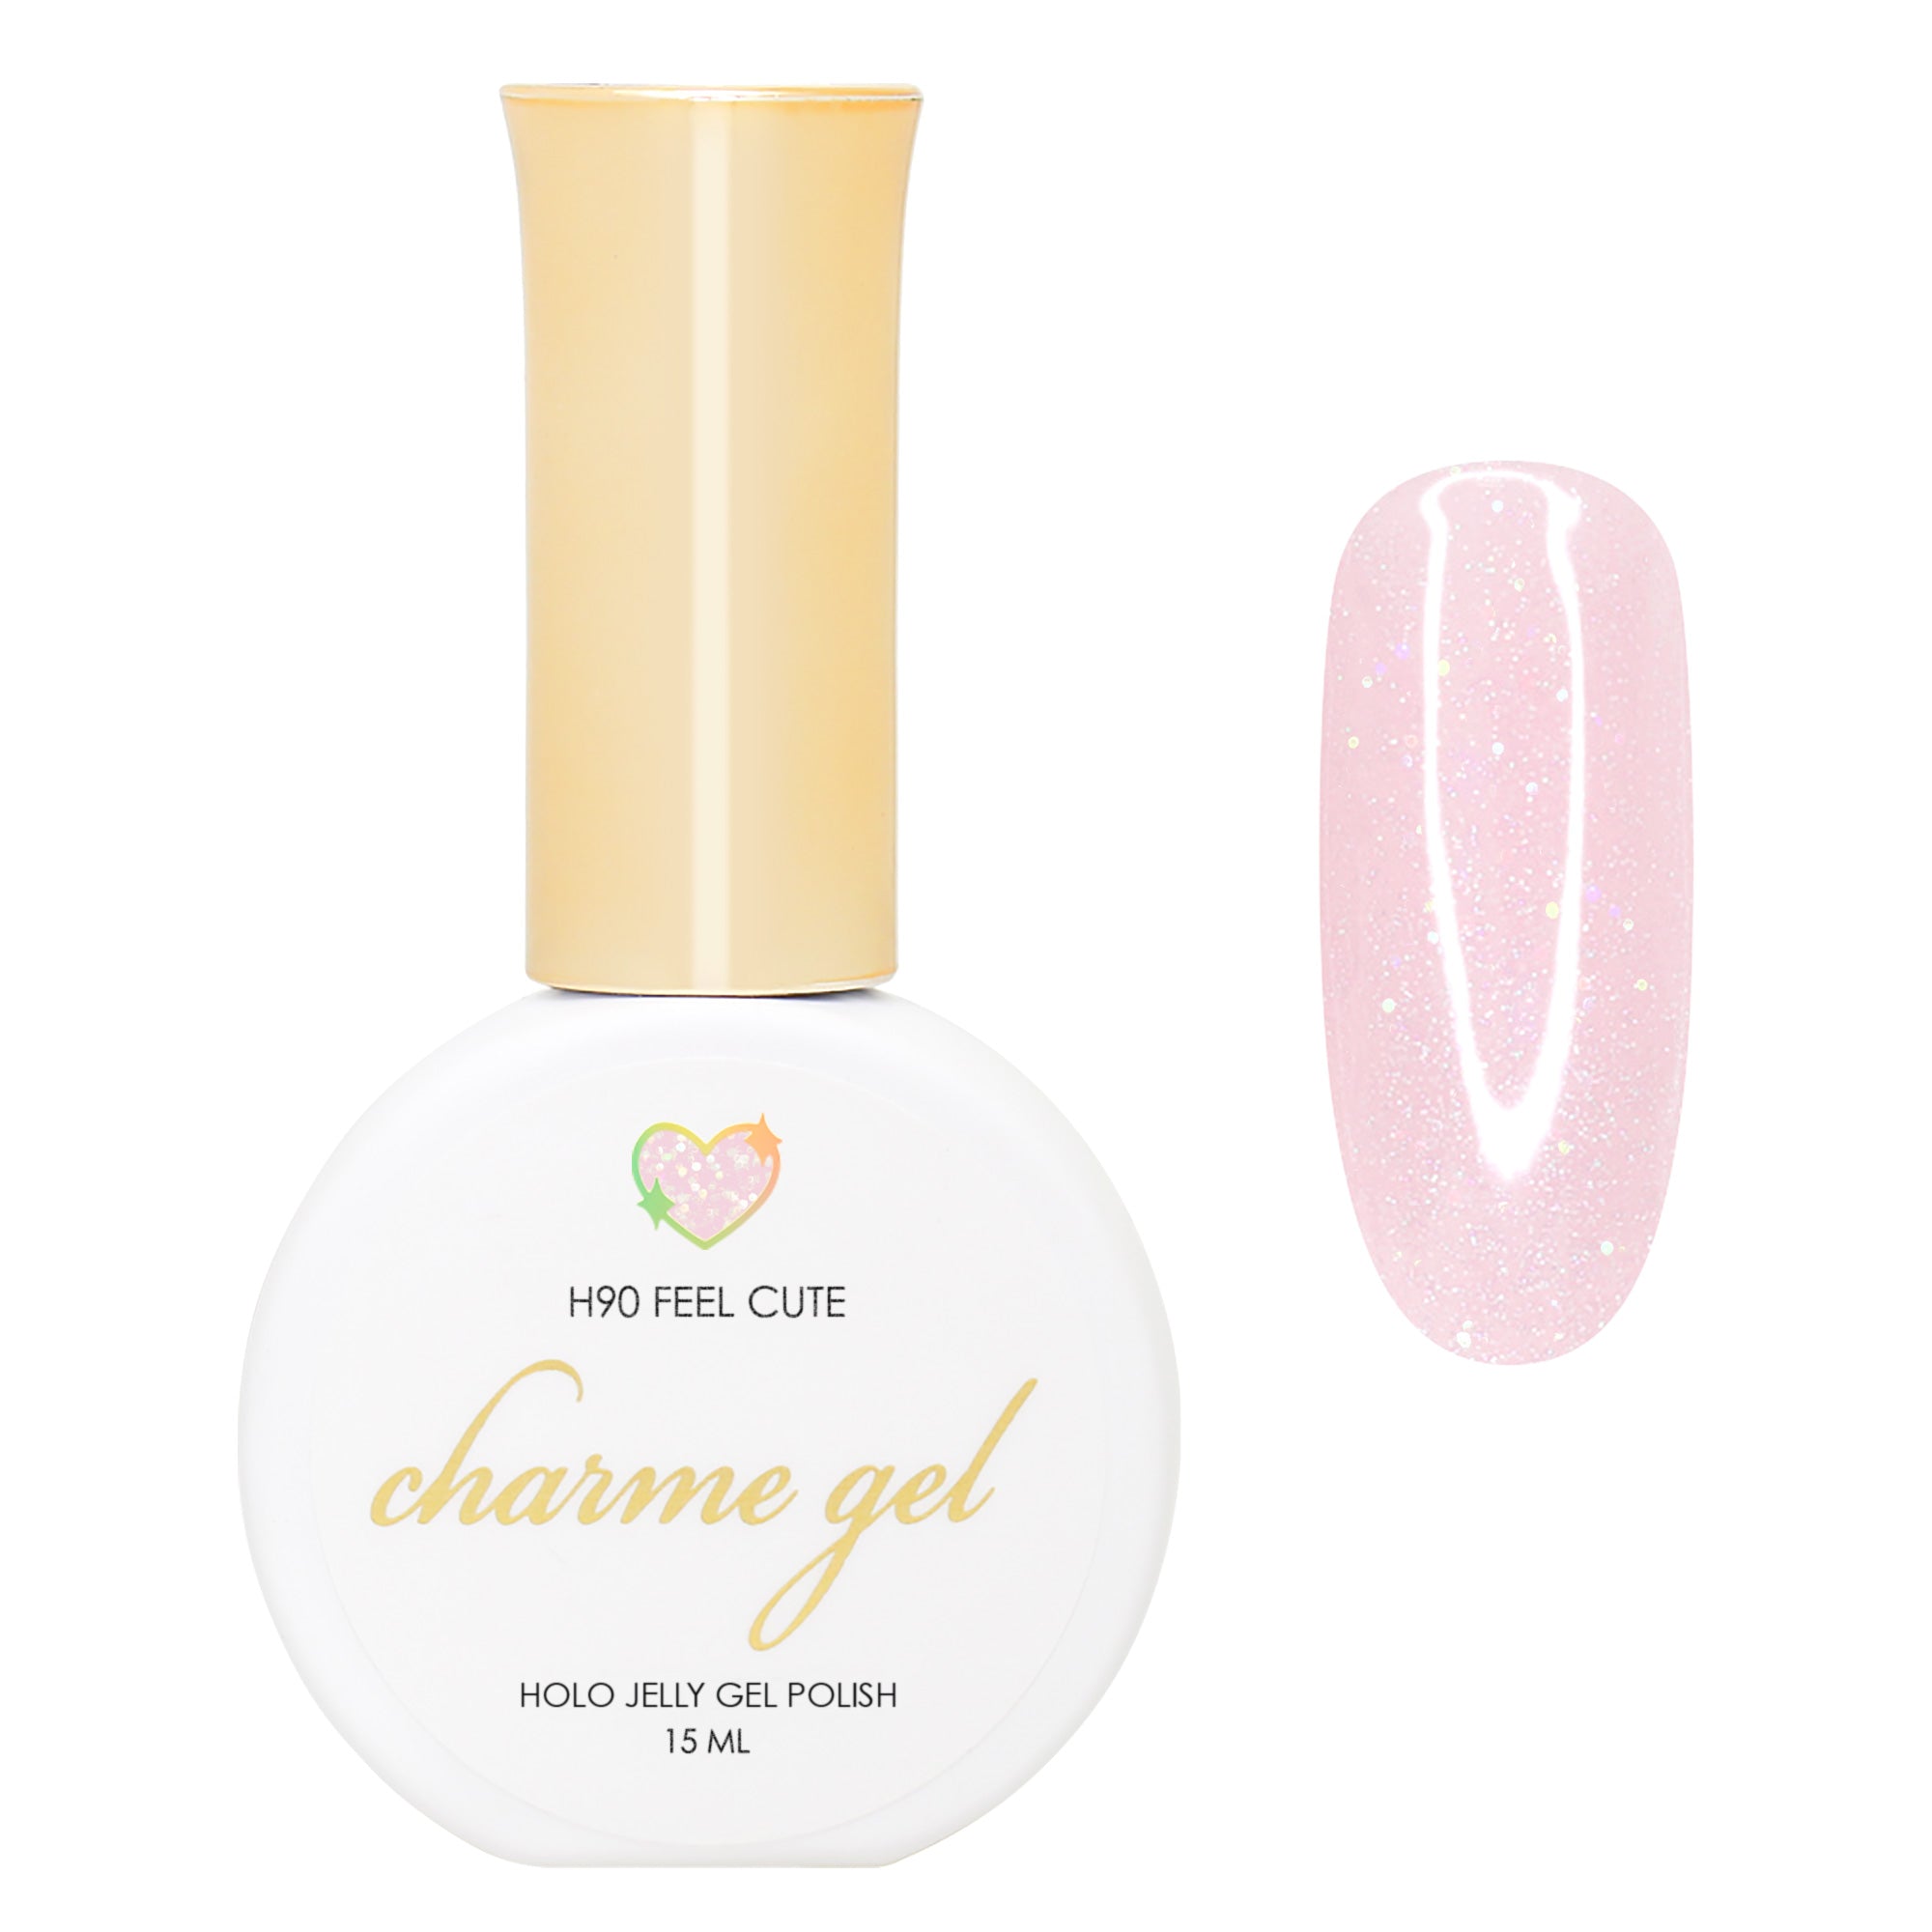 Charme Gel / Holo Jelly H90 Feel Cute Light Pink Nail Polish Holographic Coquettecore Trend